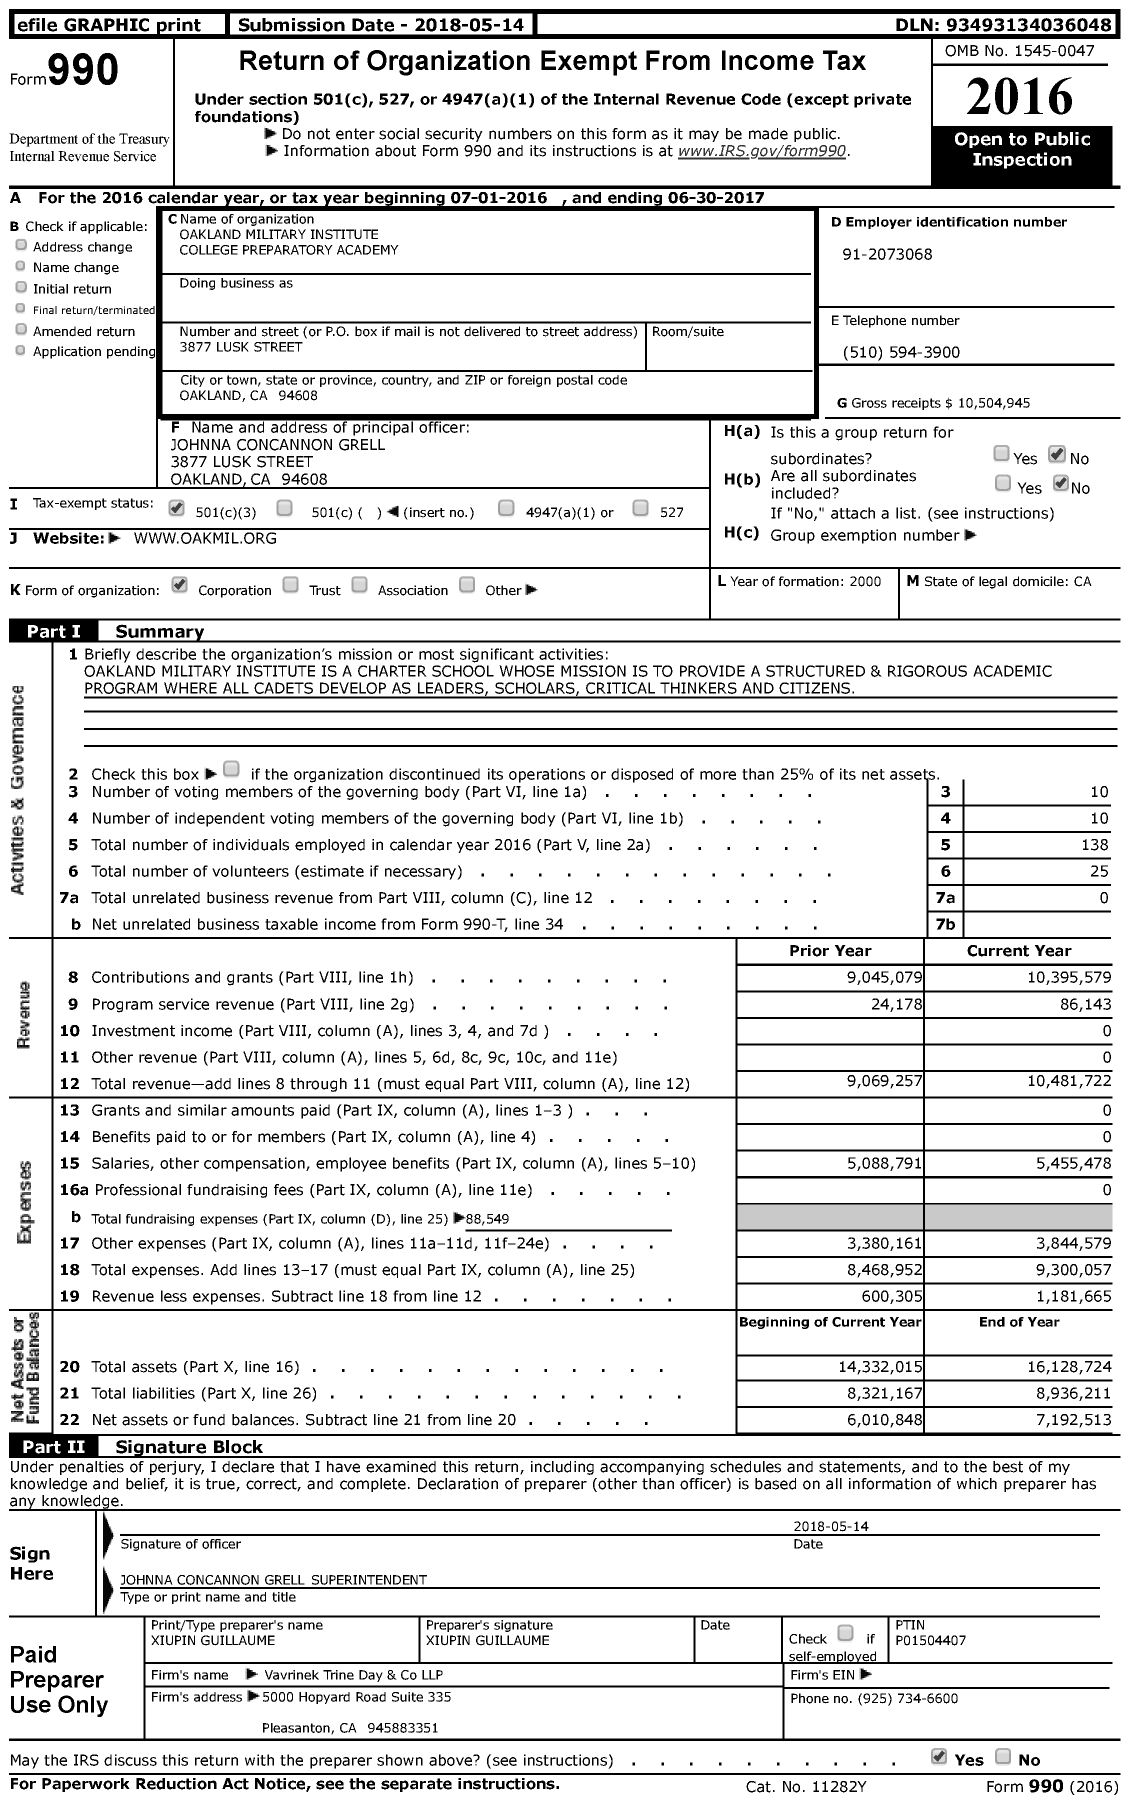 Image of first page of 2016 Form 990 for Oakland Military Institute College Preparatory Academy (OMI)